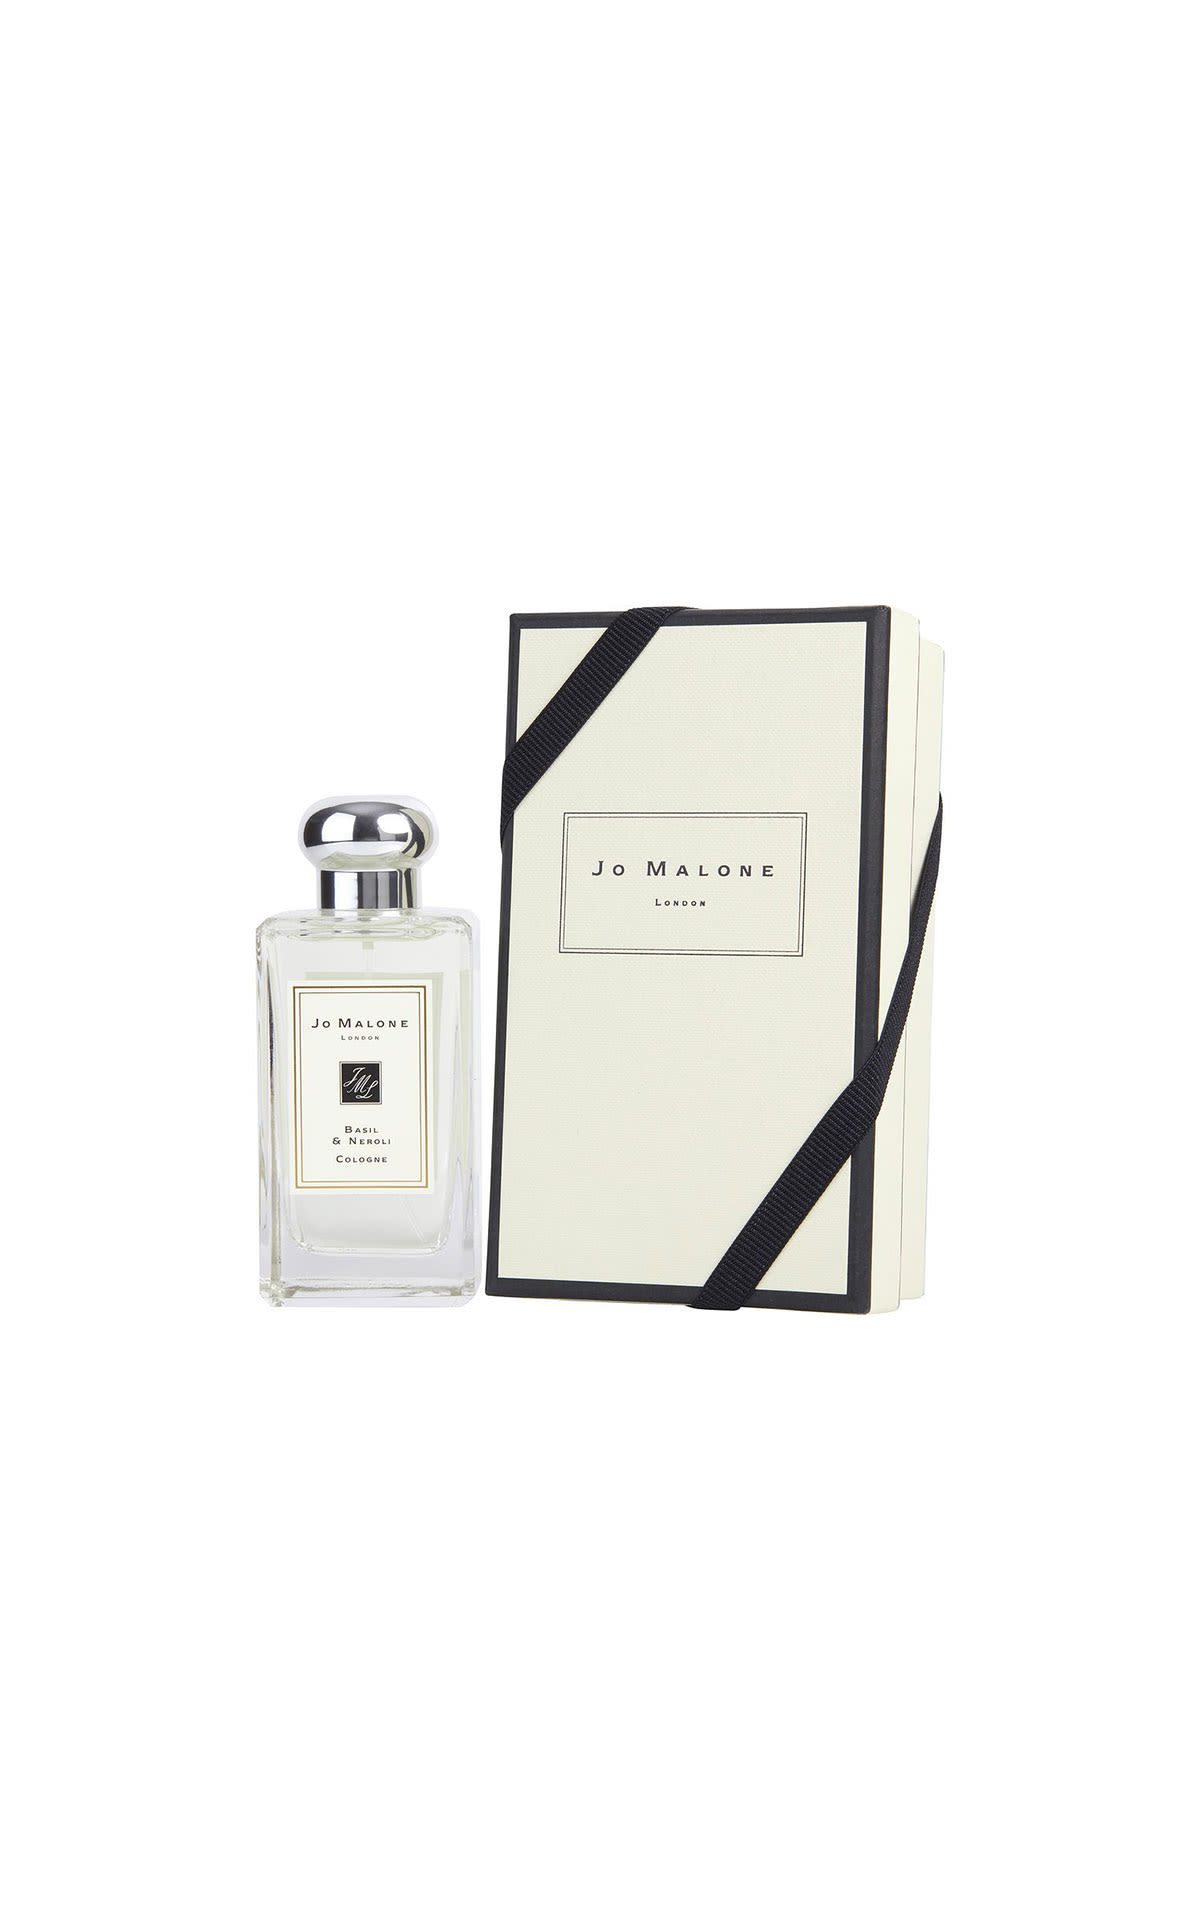 Jo Malone London Basil and neroli cologne from Bicester Village